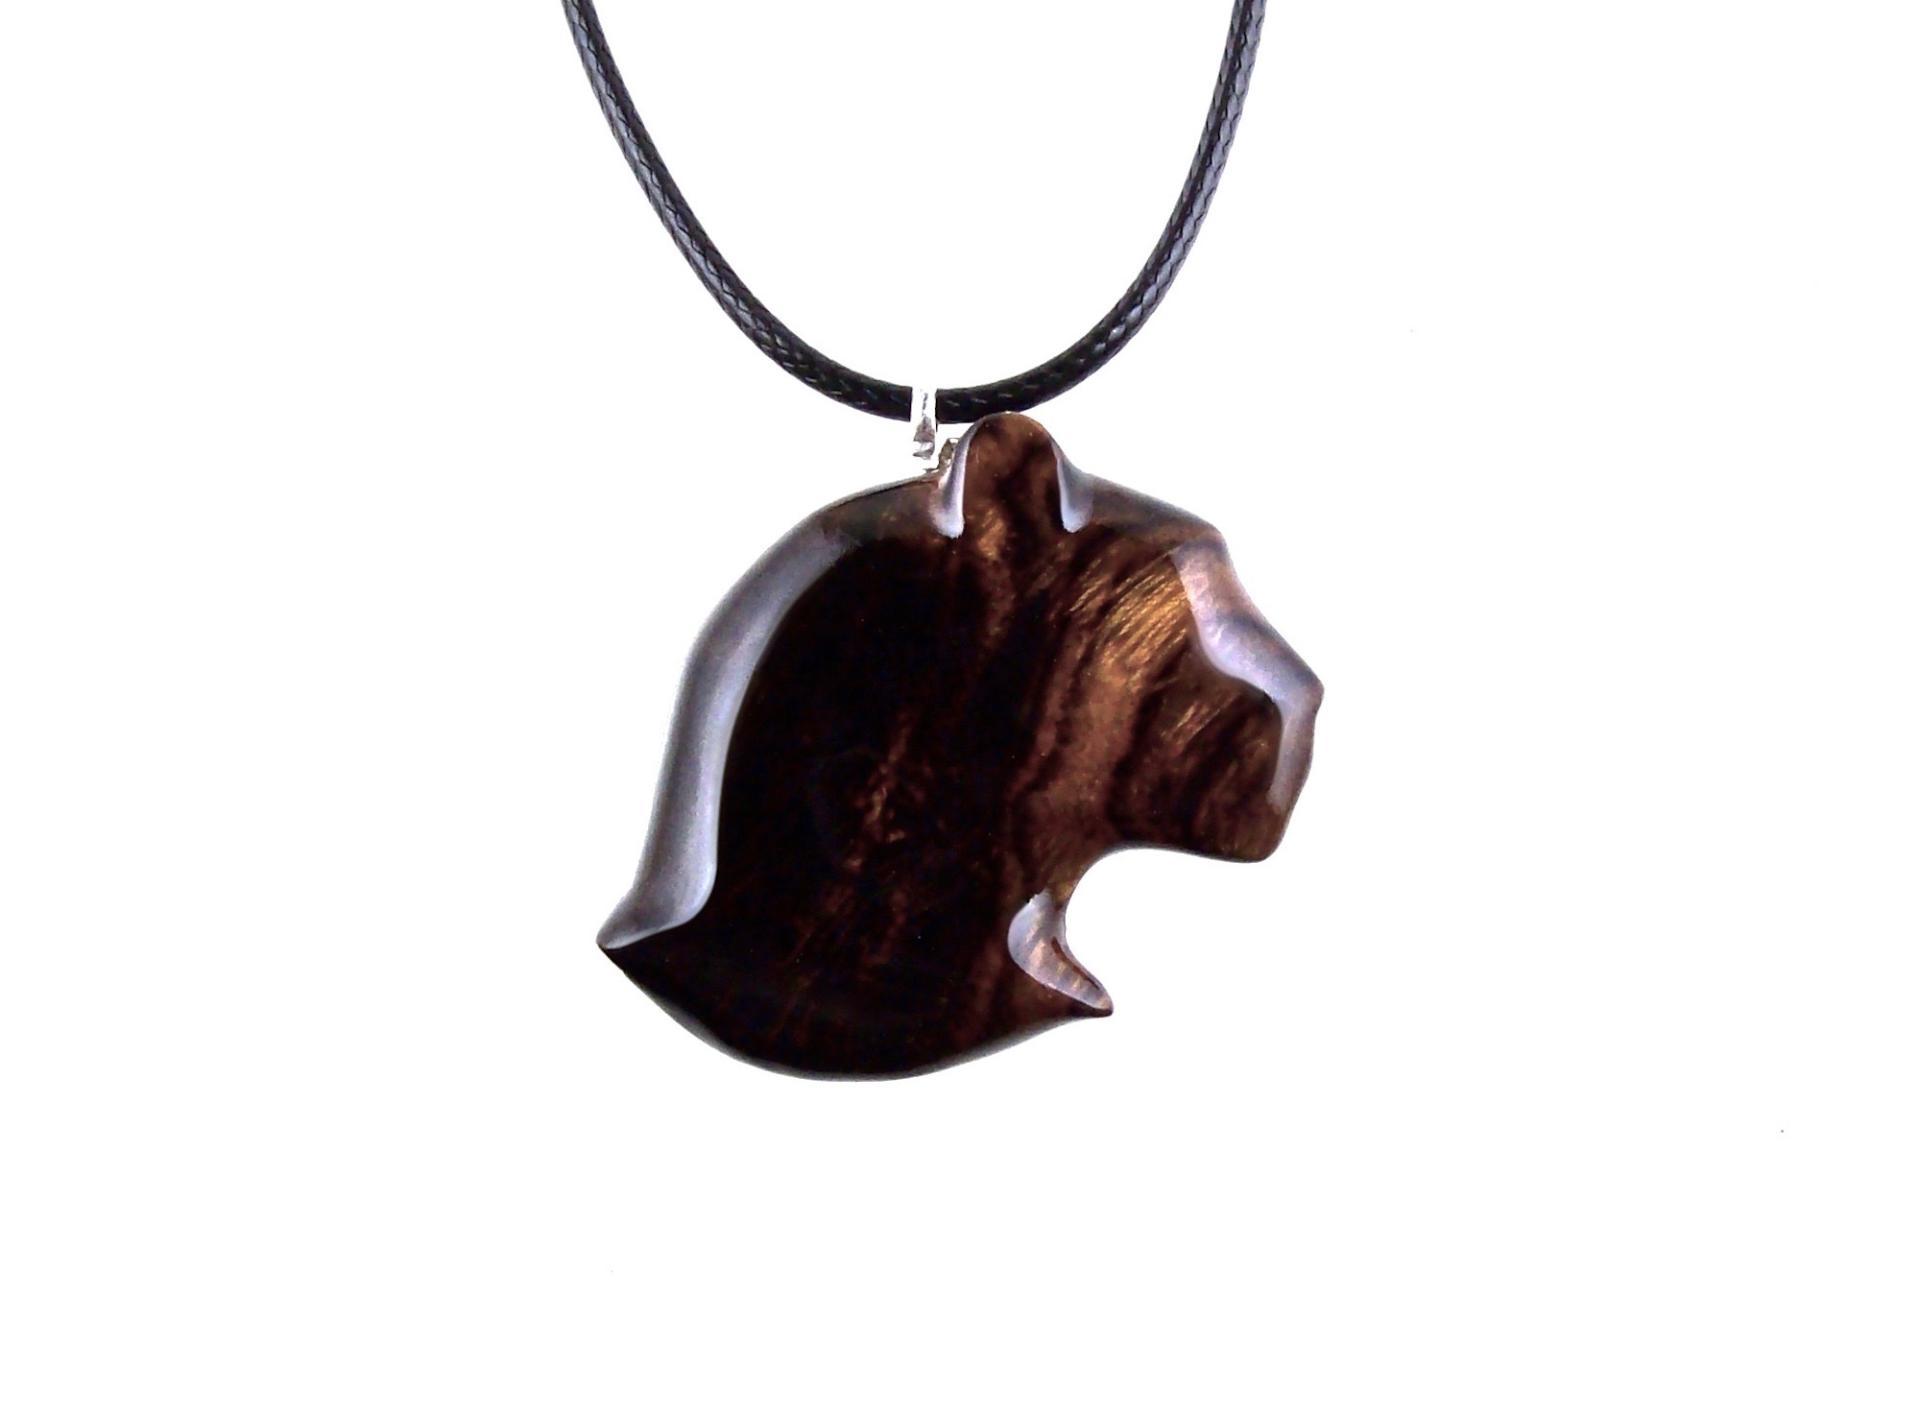 Jaguar Head Pendant, Hand Carved Panther Necklace, Wooden Cougar Necklace, Spirit Animal Totem Wood Jewelry